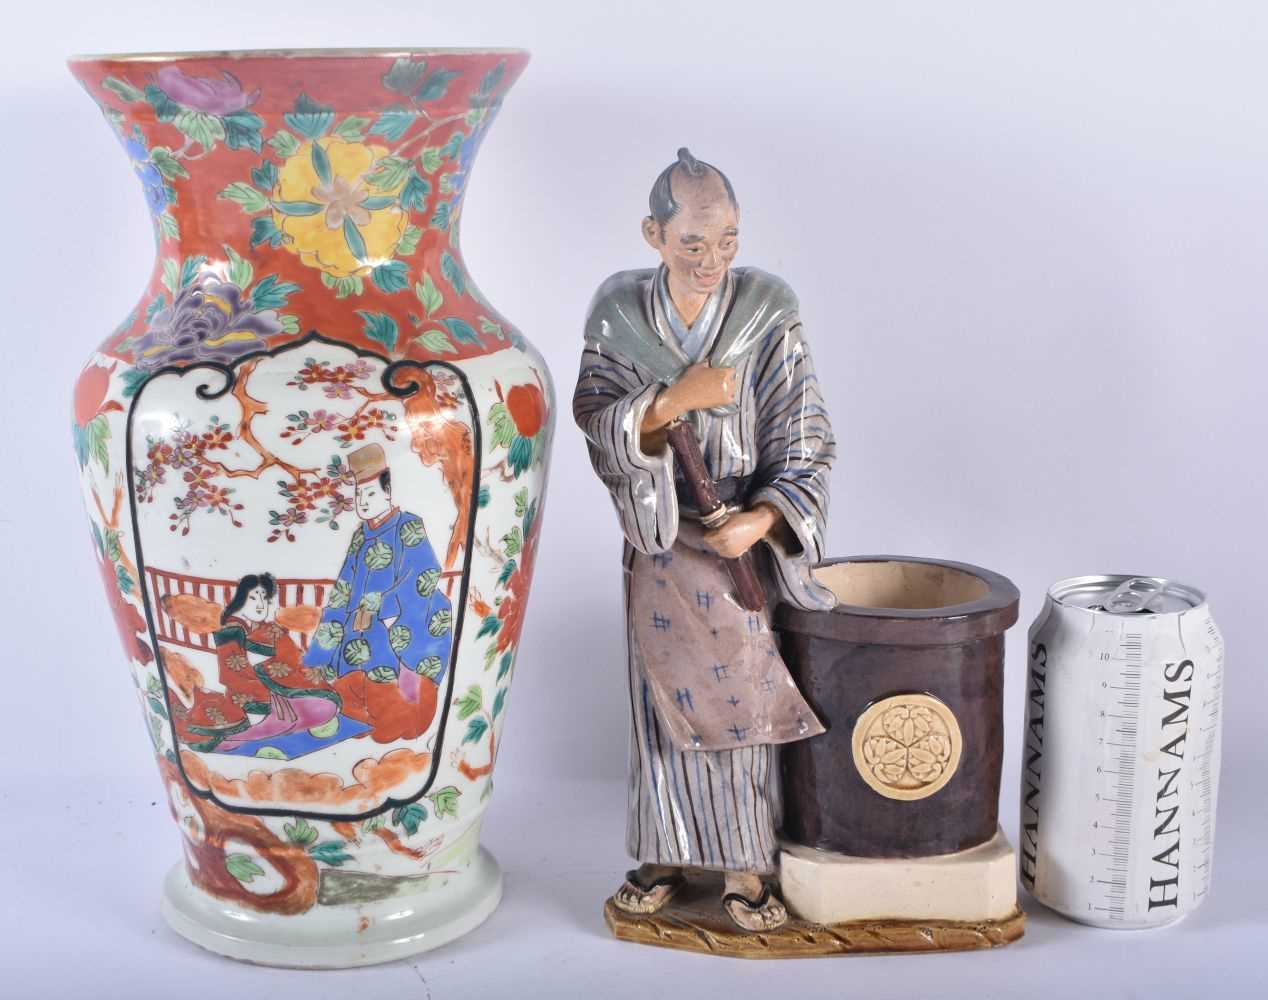 A LARGE 19TH CENTURY JAPANESE MEIJI PERIOD KUTANI PORCELAIN VASE together with a Japanese pottery